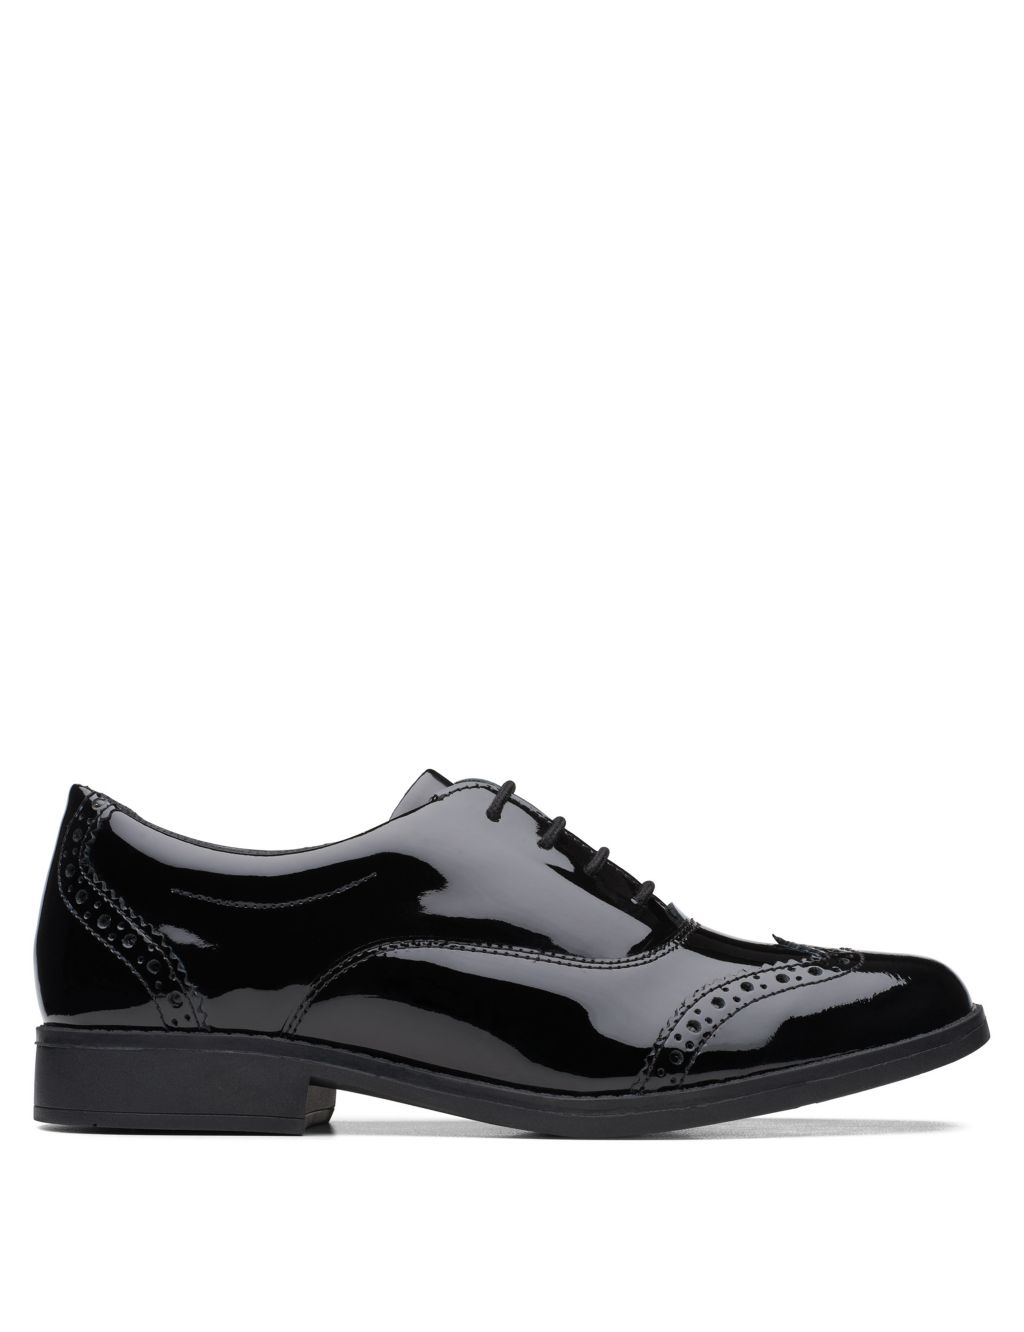 Kids' Leather Brogues image 1